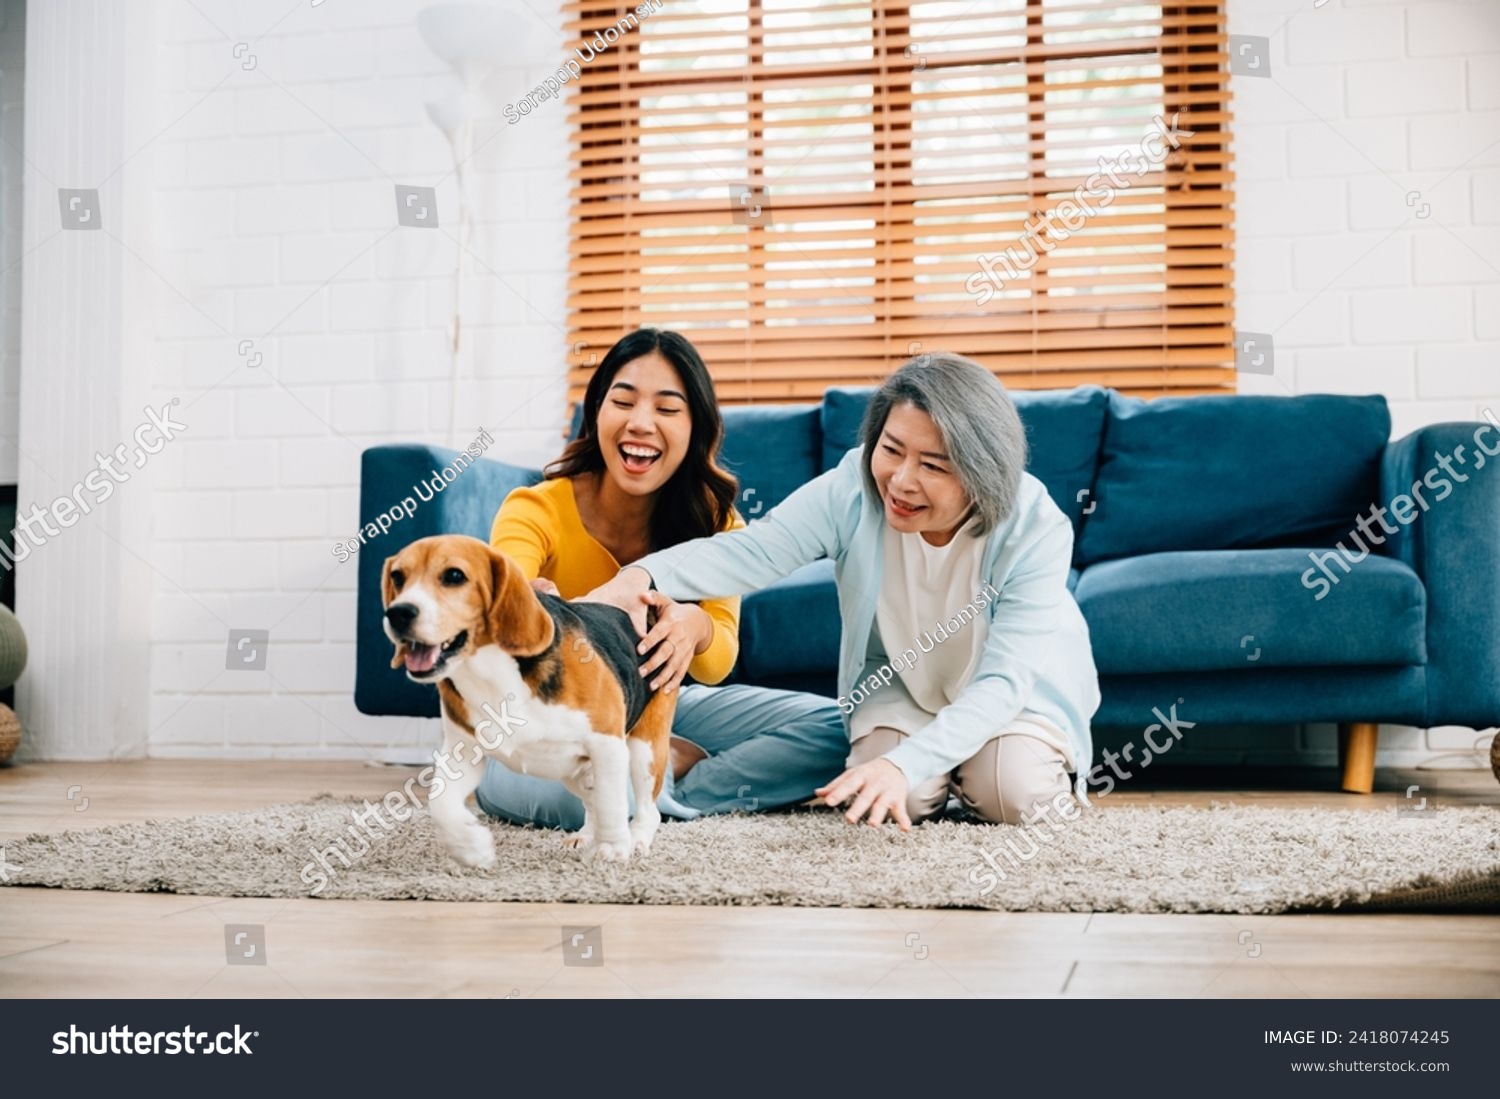 Weekend leisure activity at home, A woman and her mother share glad moments with their Beagle dog, running together in the living room. Their friendship is heartwarming. pet love #2418074245